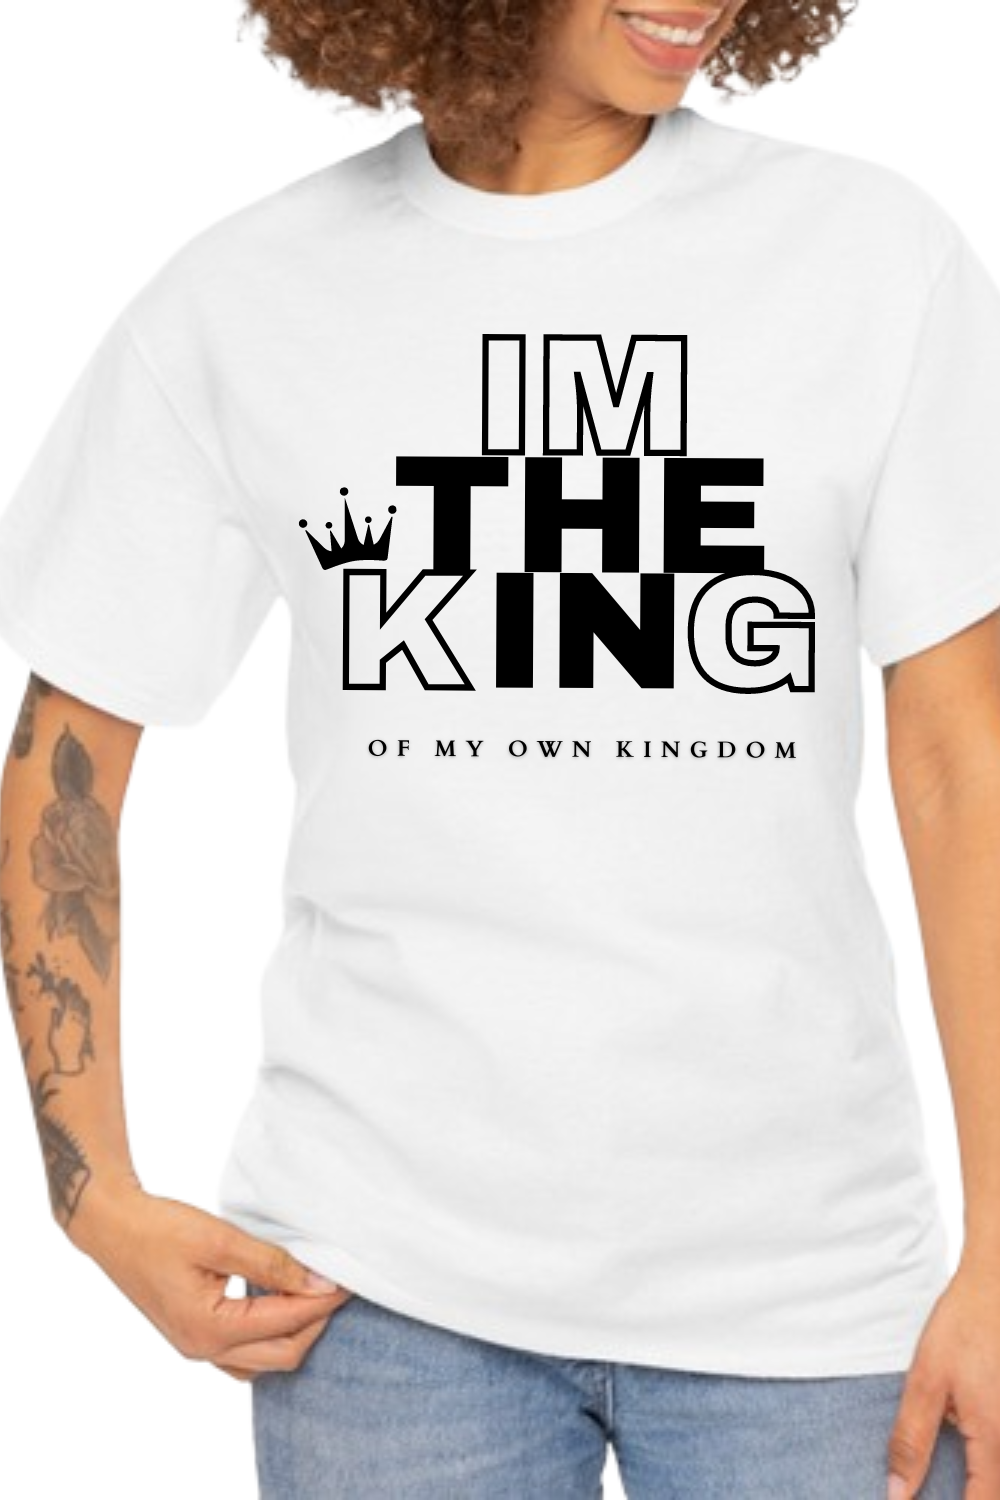 I’m the king of my own kingdom pinterest preview image.